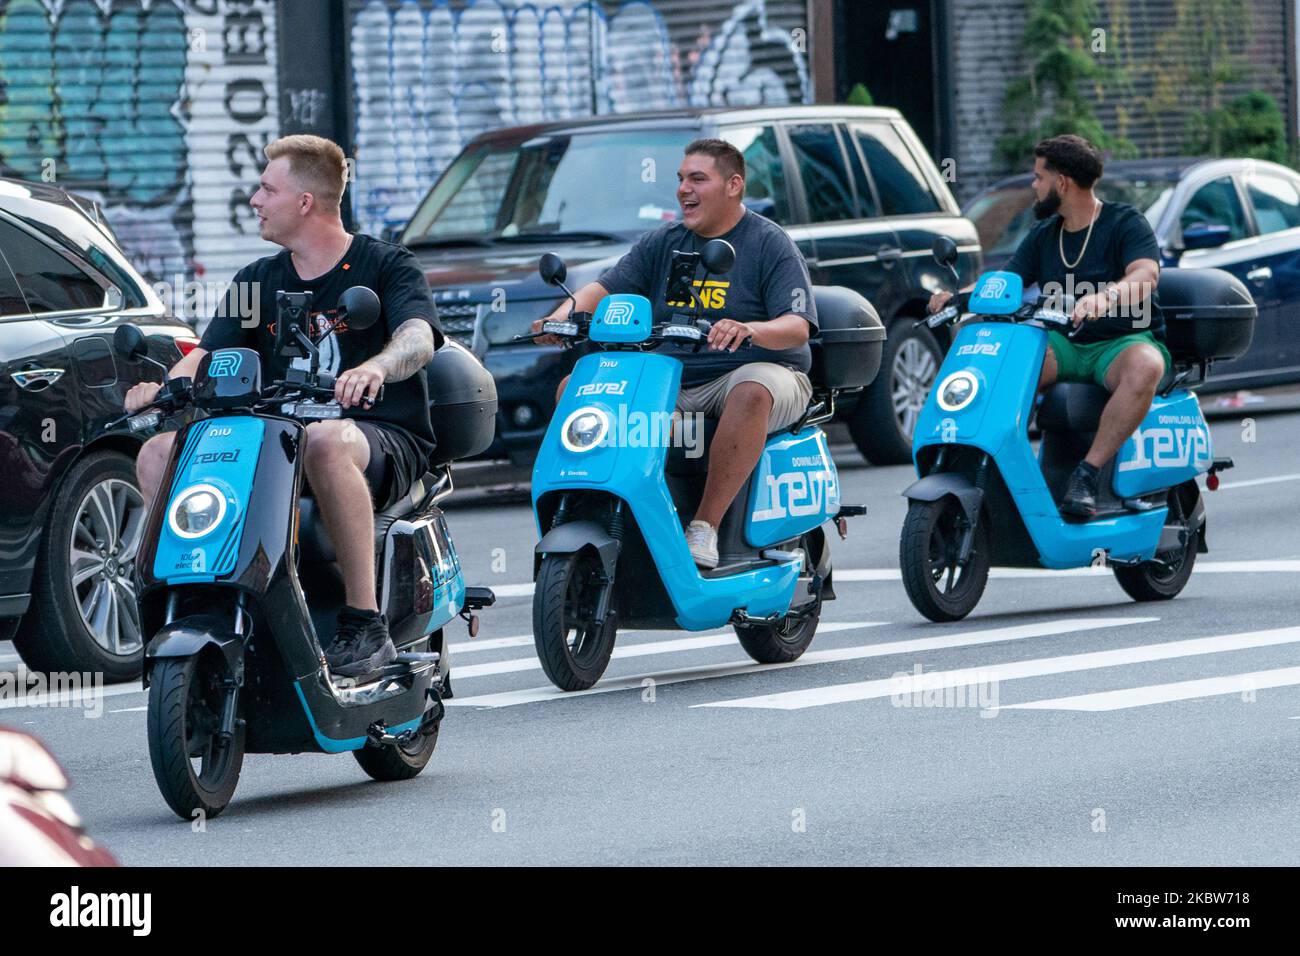 People are seen riding Revel scooters as New York City enters Phase 4 of re-opening following restrictions imposed to slow the spread of coronavirus on July 25, 2020 in New York City. The fourth phase allows outdoor arts and entertainment, sporting events without fans and media production. Scooter-share startup Revel faces questions after first death in NYC. (Photo by John Nacion/NurPhoto) Stock Photo